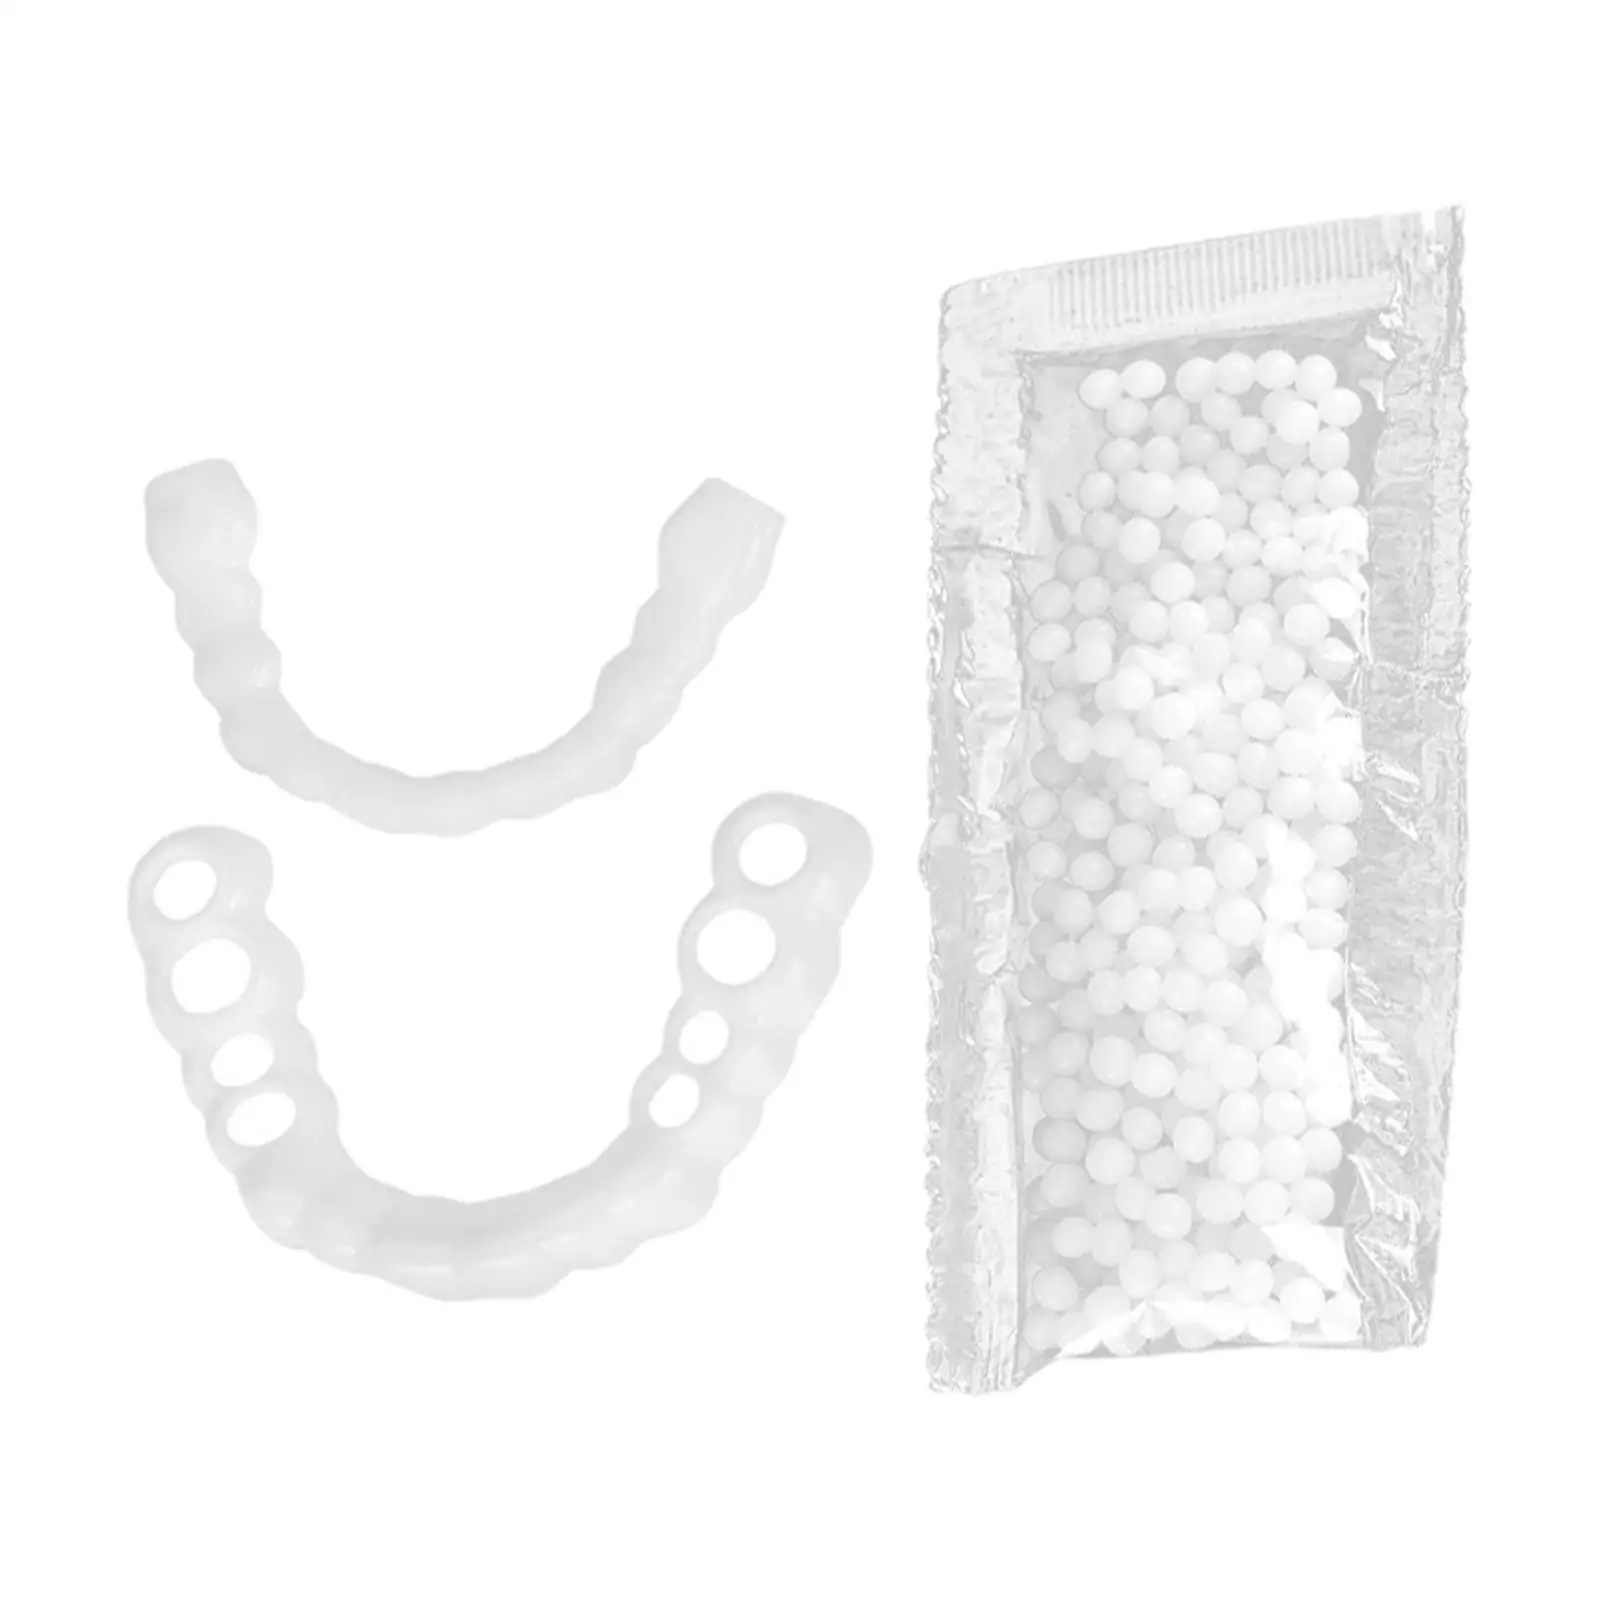 False Teeth Covers Upper and Lower White Gel Silica Veneers Denture Simulation Cover Fake Tooth Covers for Whitening Smile Mouth